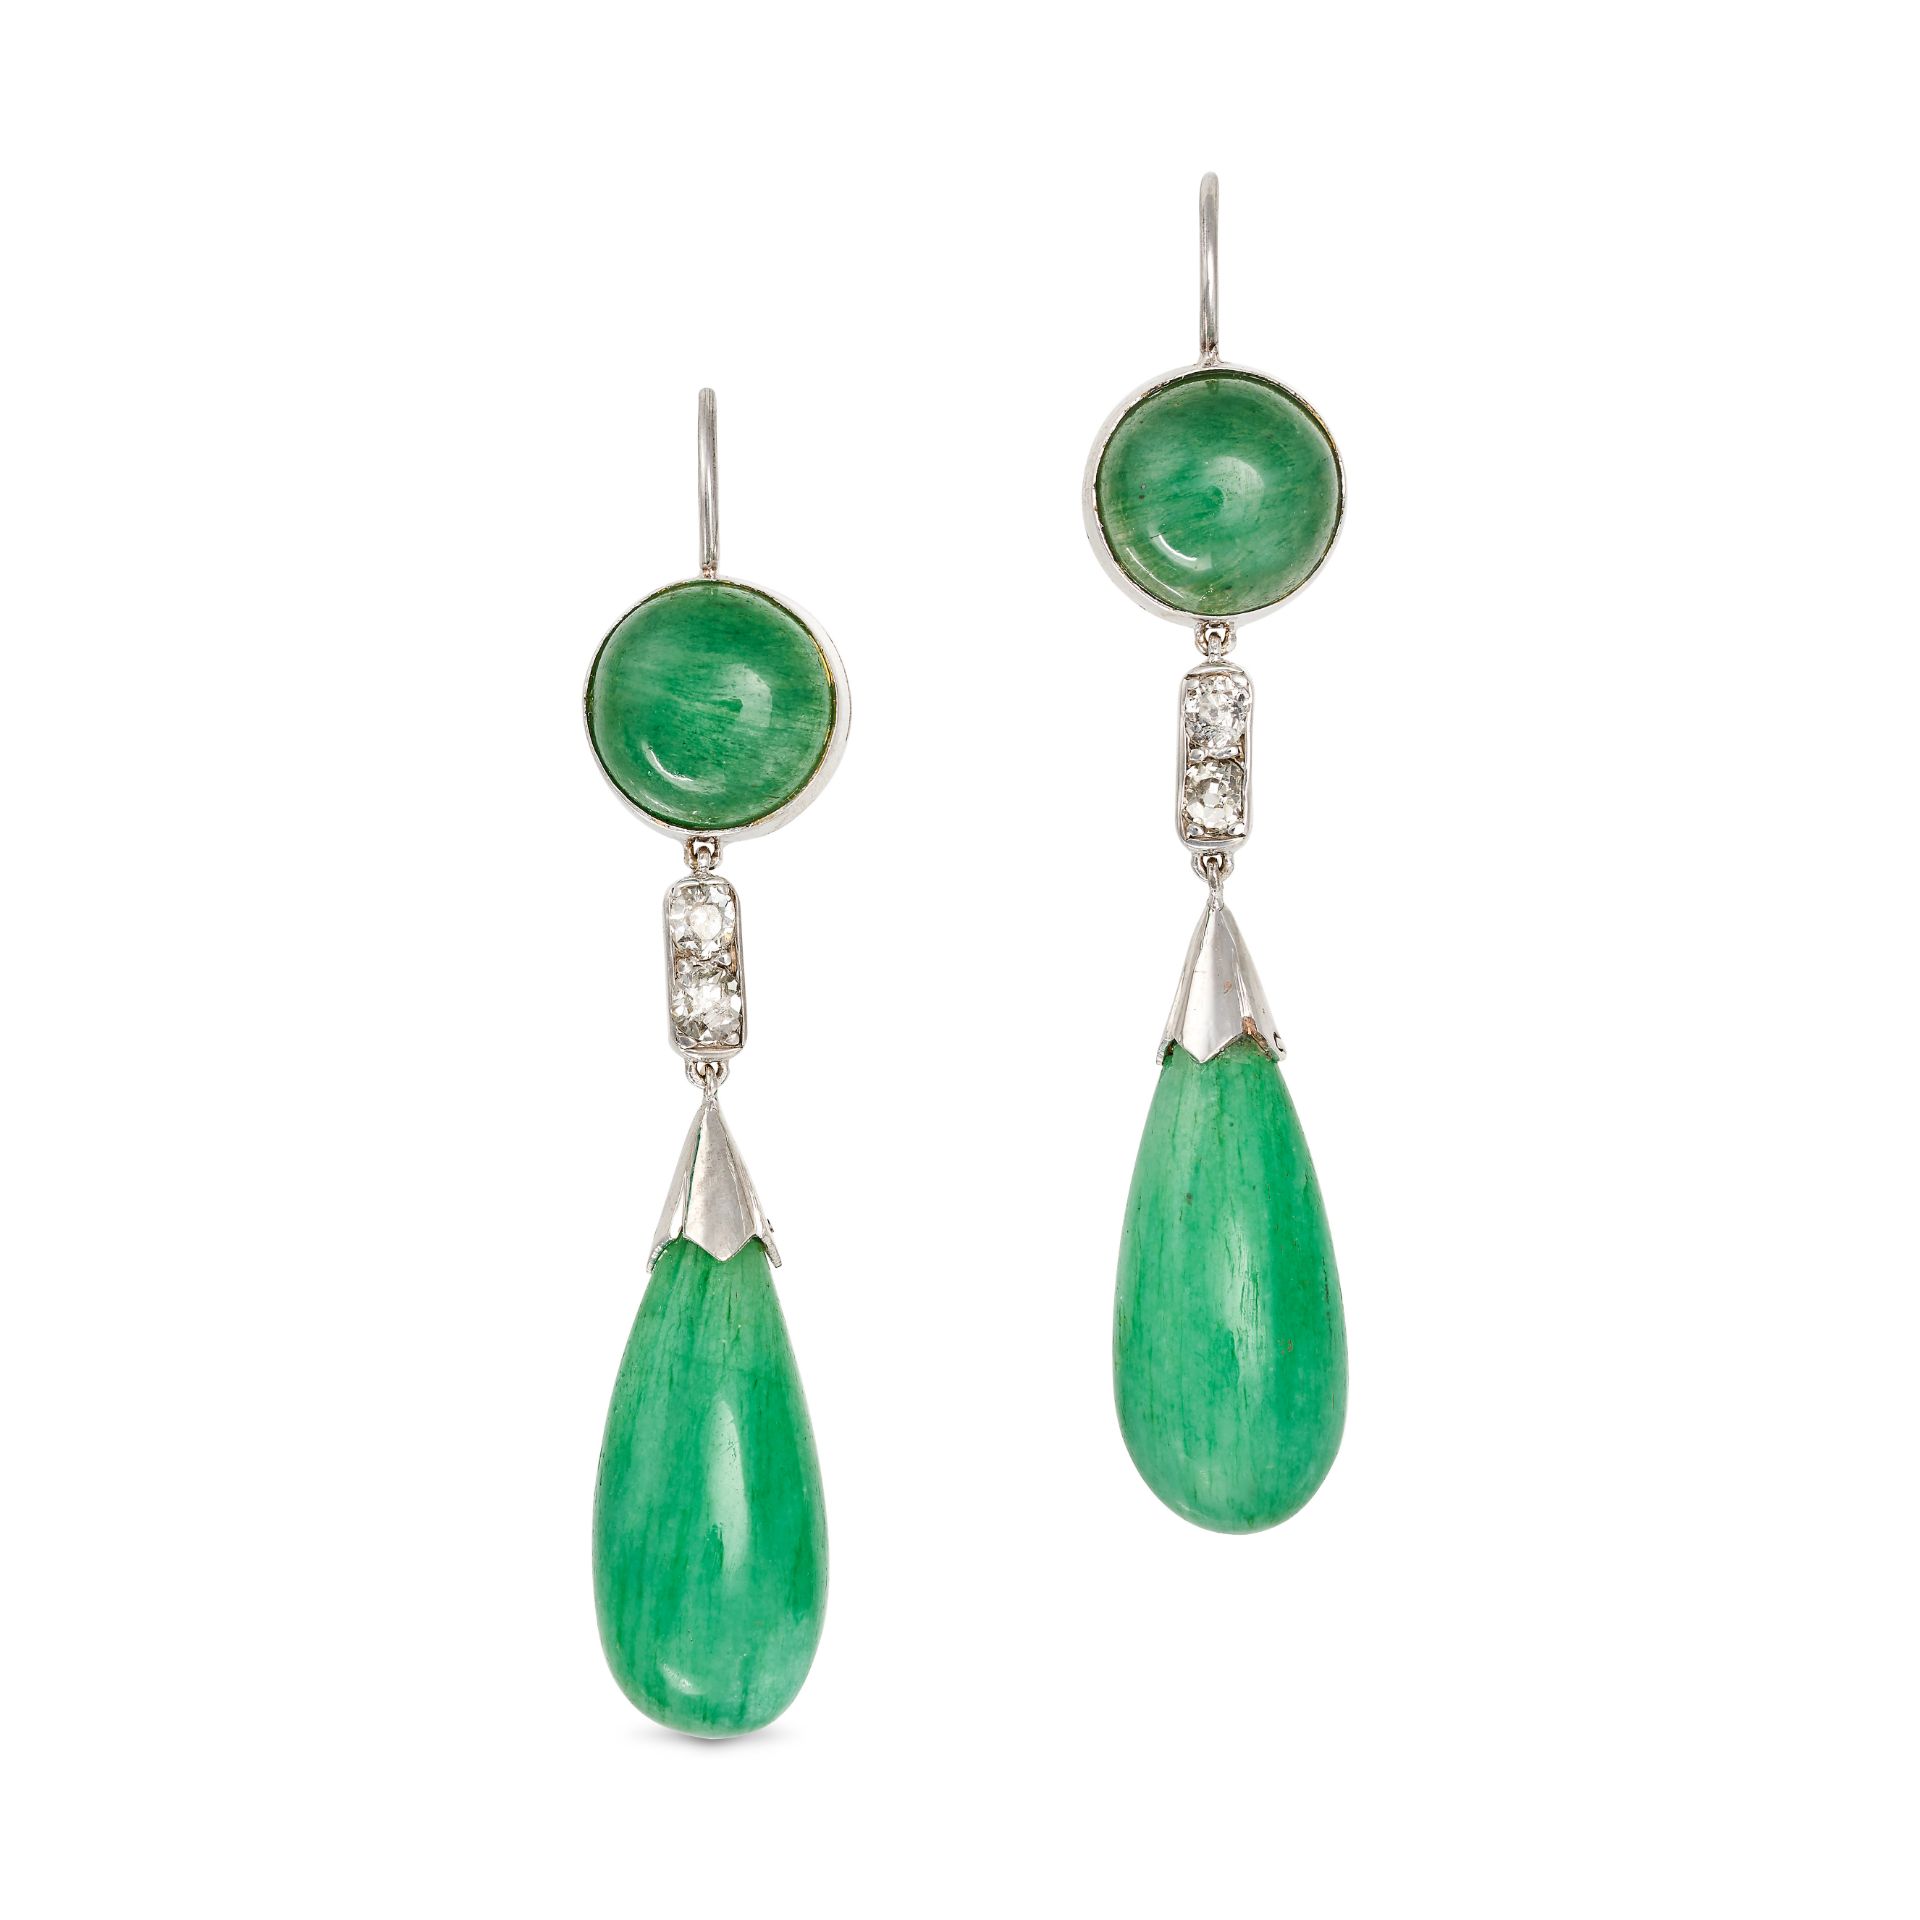 A PAIR OF EMERALD AND DIAMOND DROP EARRINGS each set with a round cabochon emerald suspending a l...